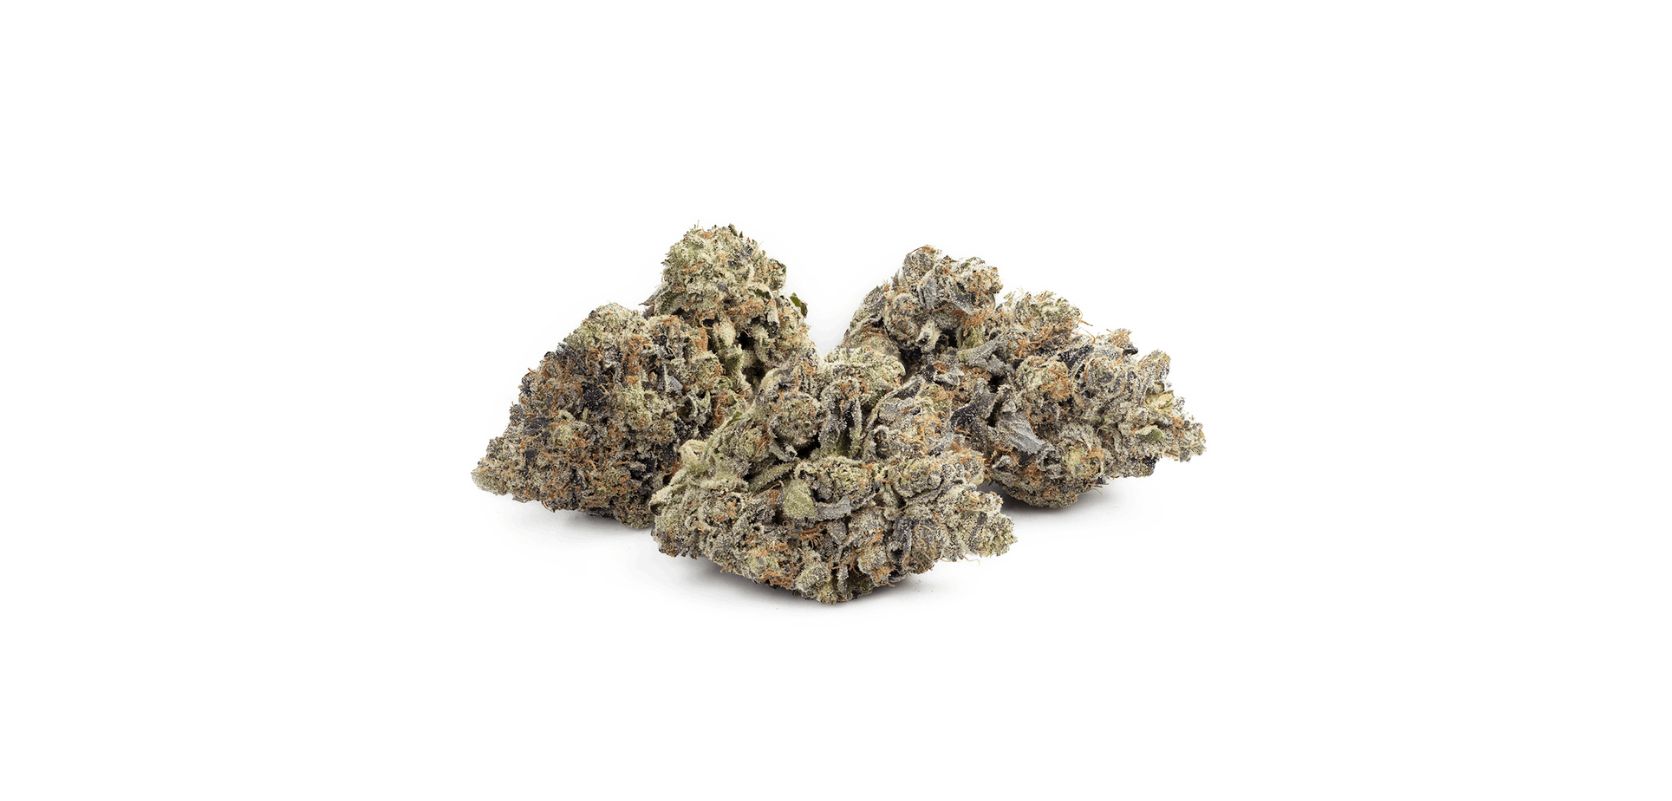 The Hi Octane strain, as we shall get to see in this weed review, is a strain that captivates both recreational and medical marijuana patients. 